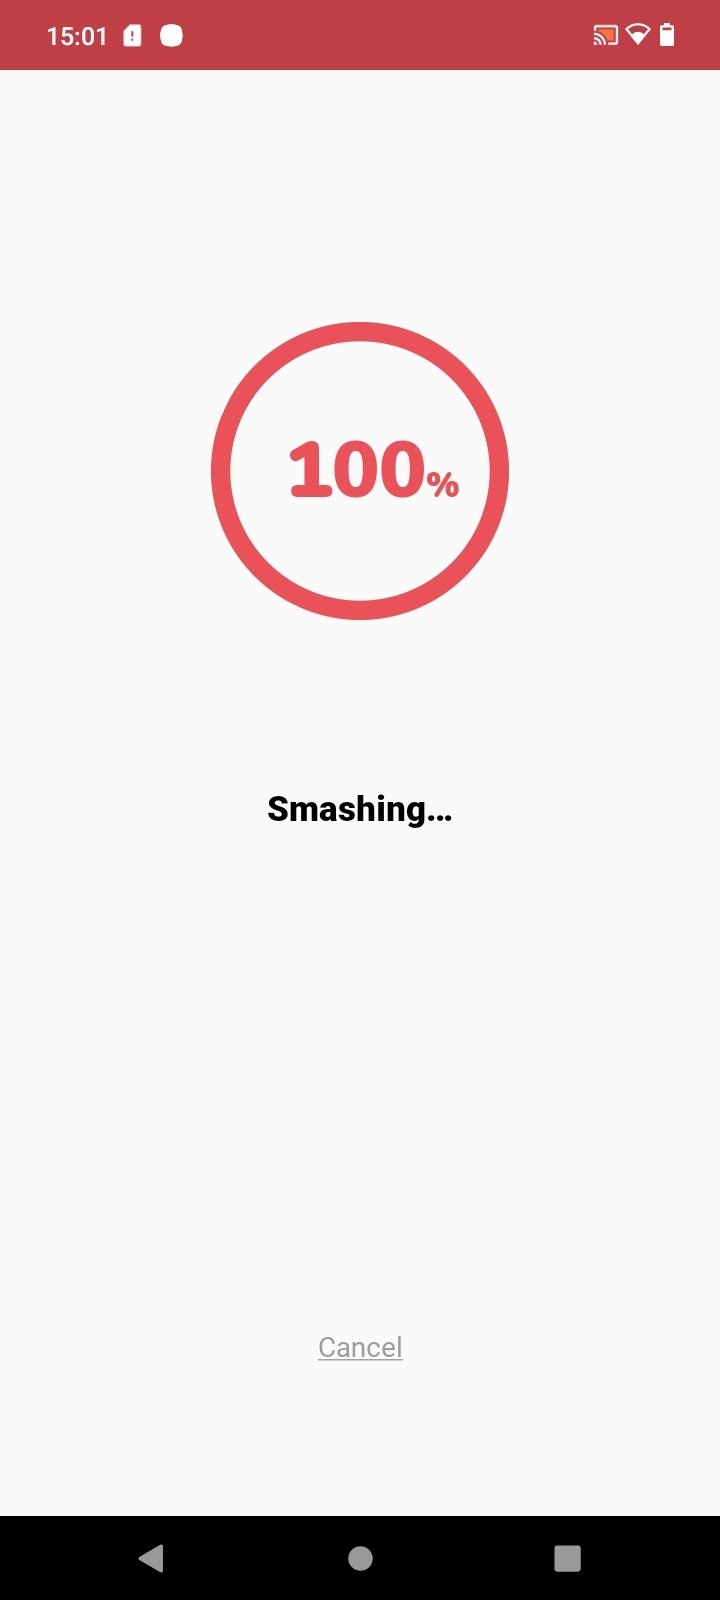 Smash: File transfer APK (Android App) - Free Download